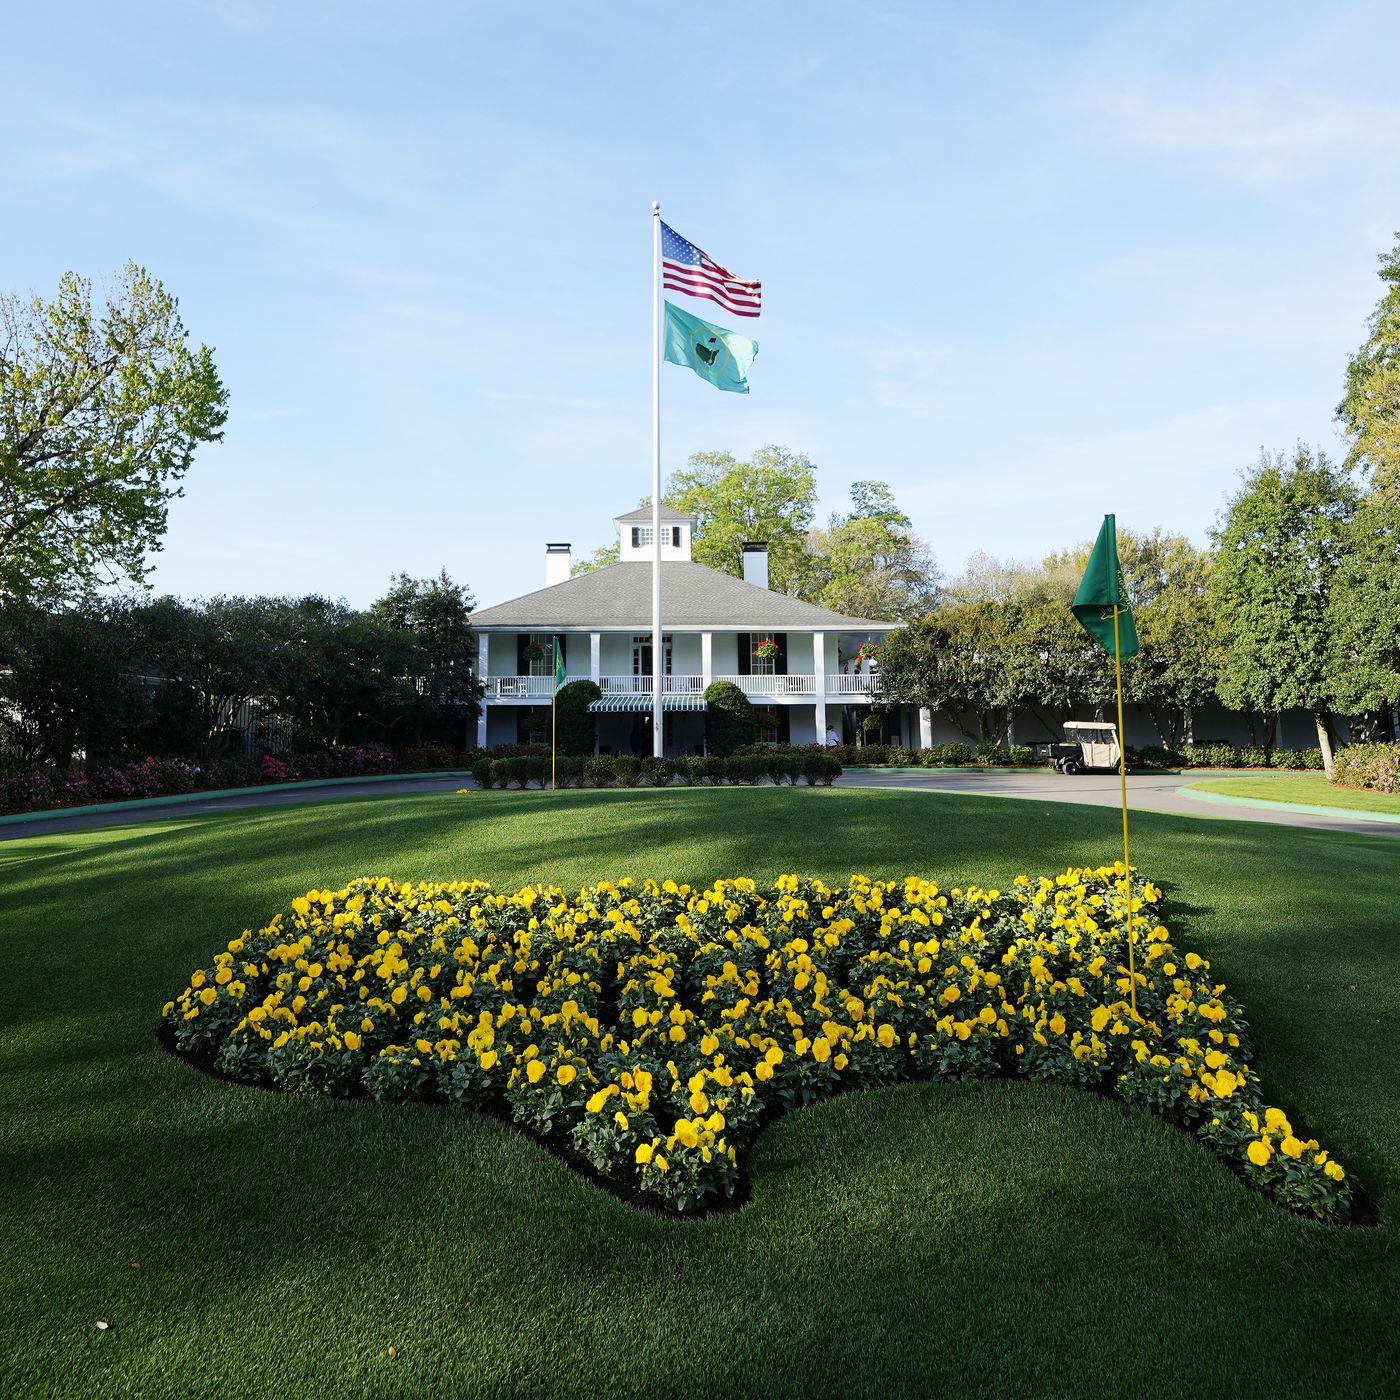 Berckmans Place: What is it, and do you get there? Behind exclusive VIP  area at The Masters - DraftKings Network